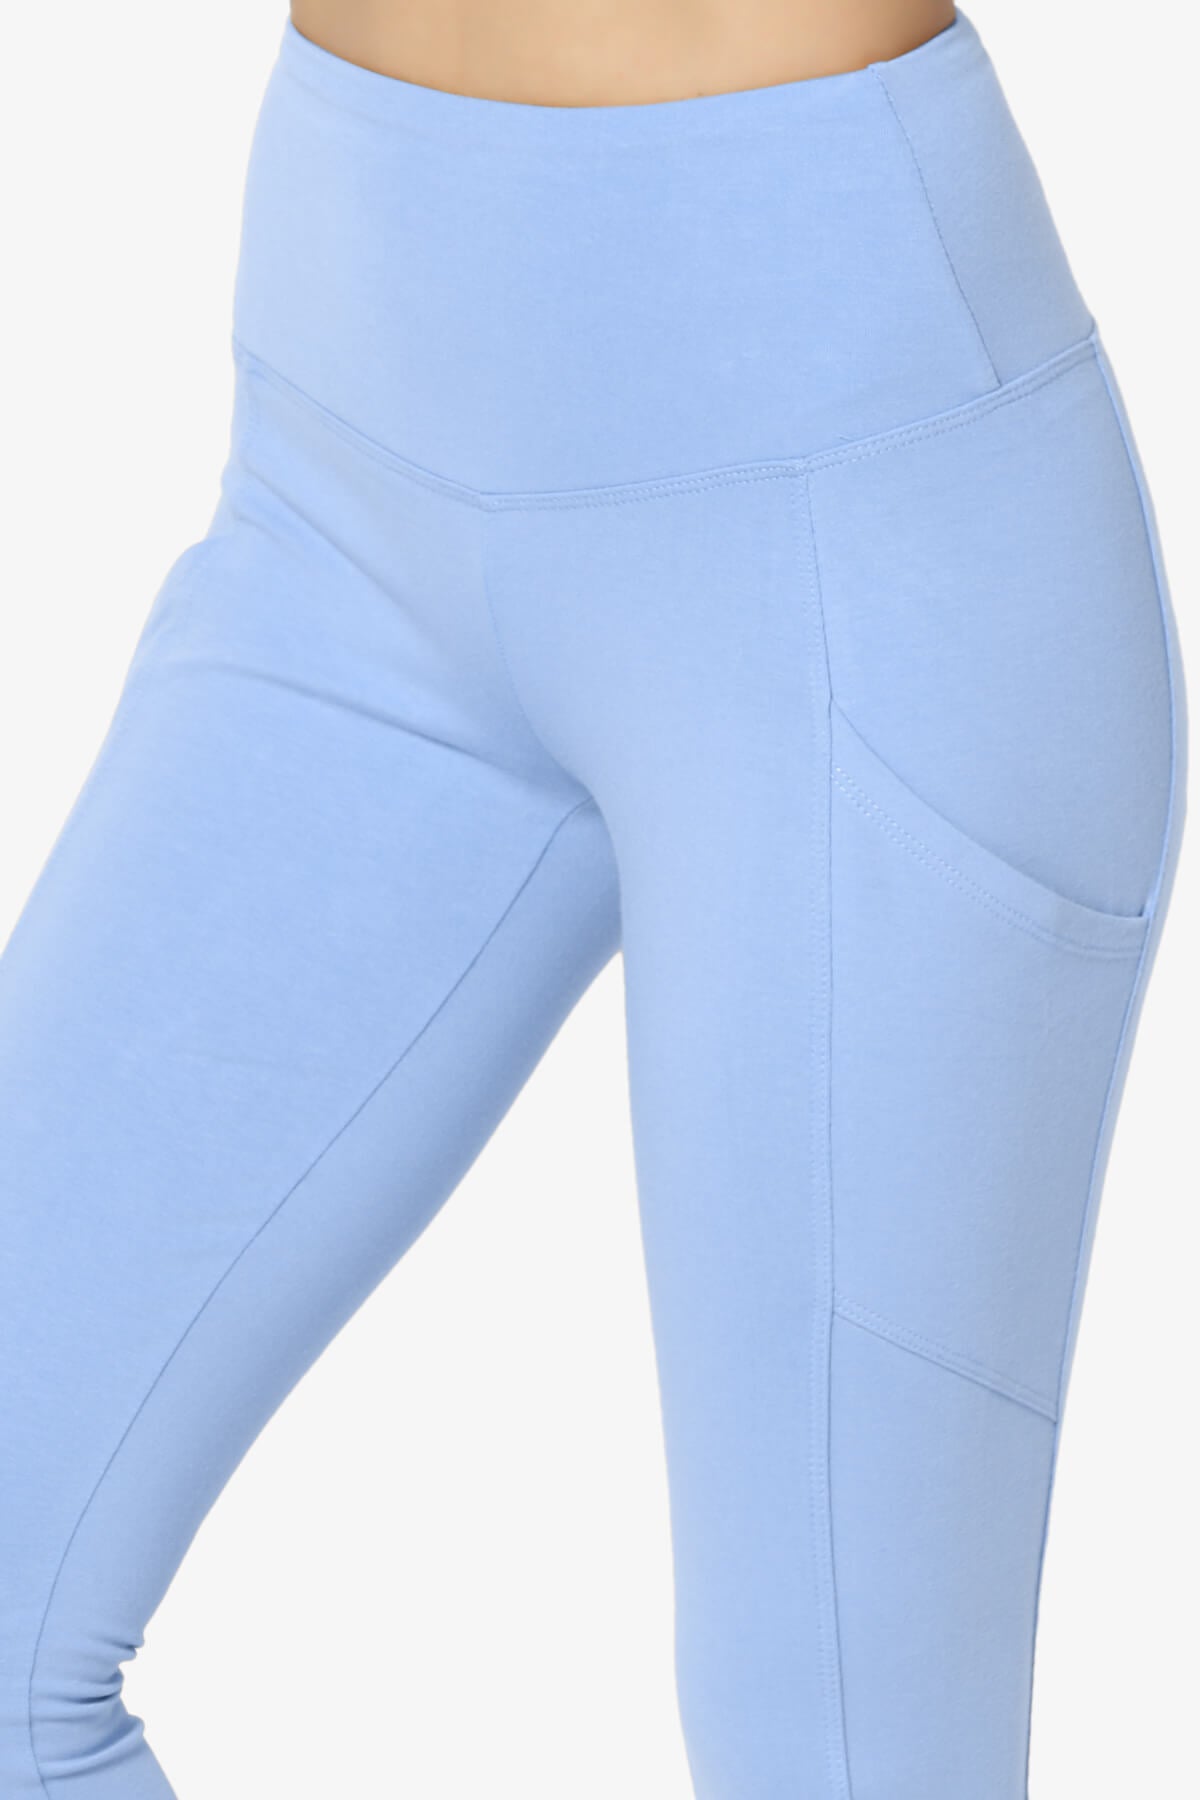 Ansley Luxe Cotton Leggings with Pockets LIGHT BLUE_5